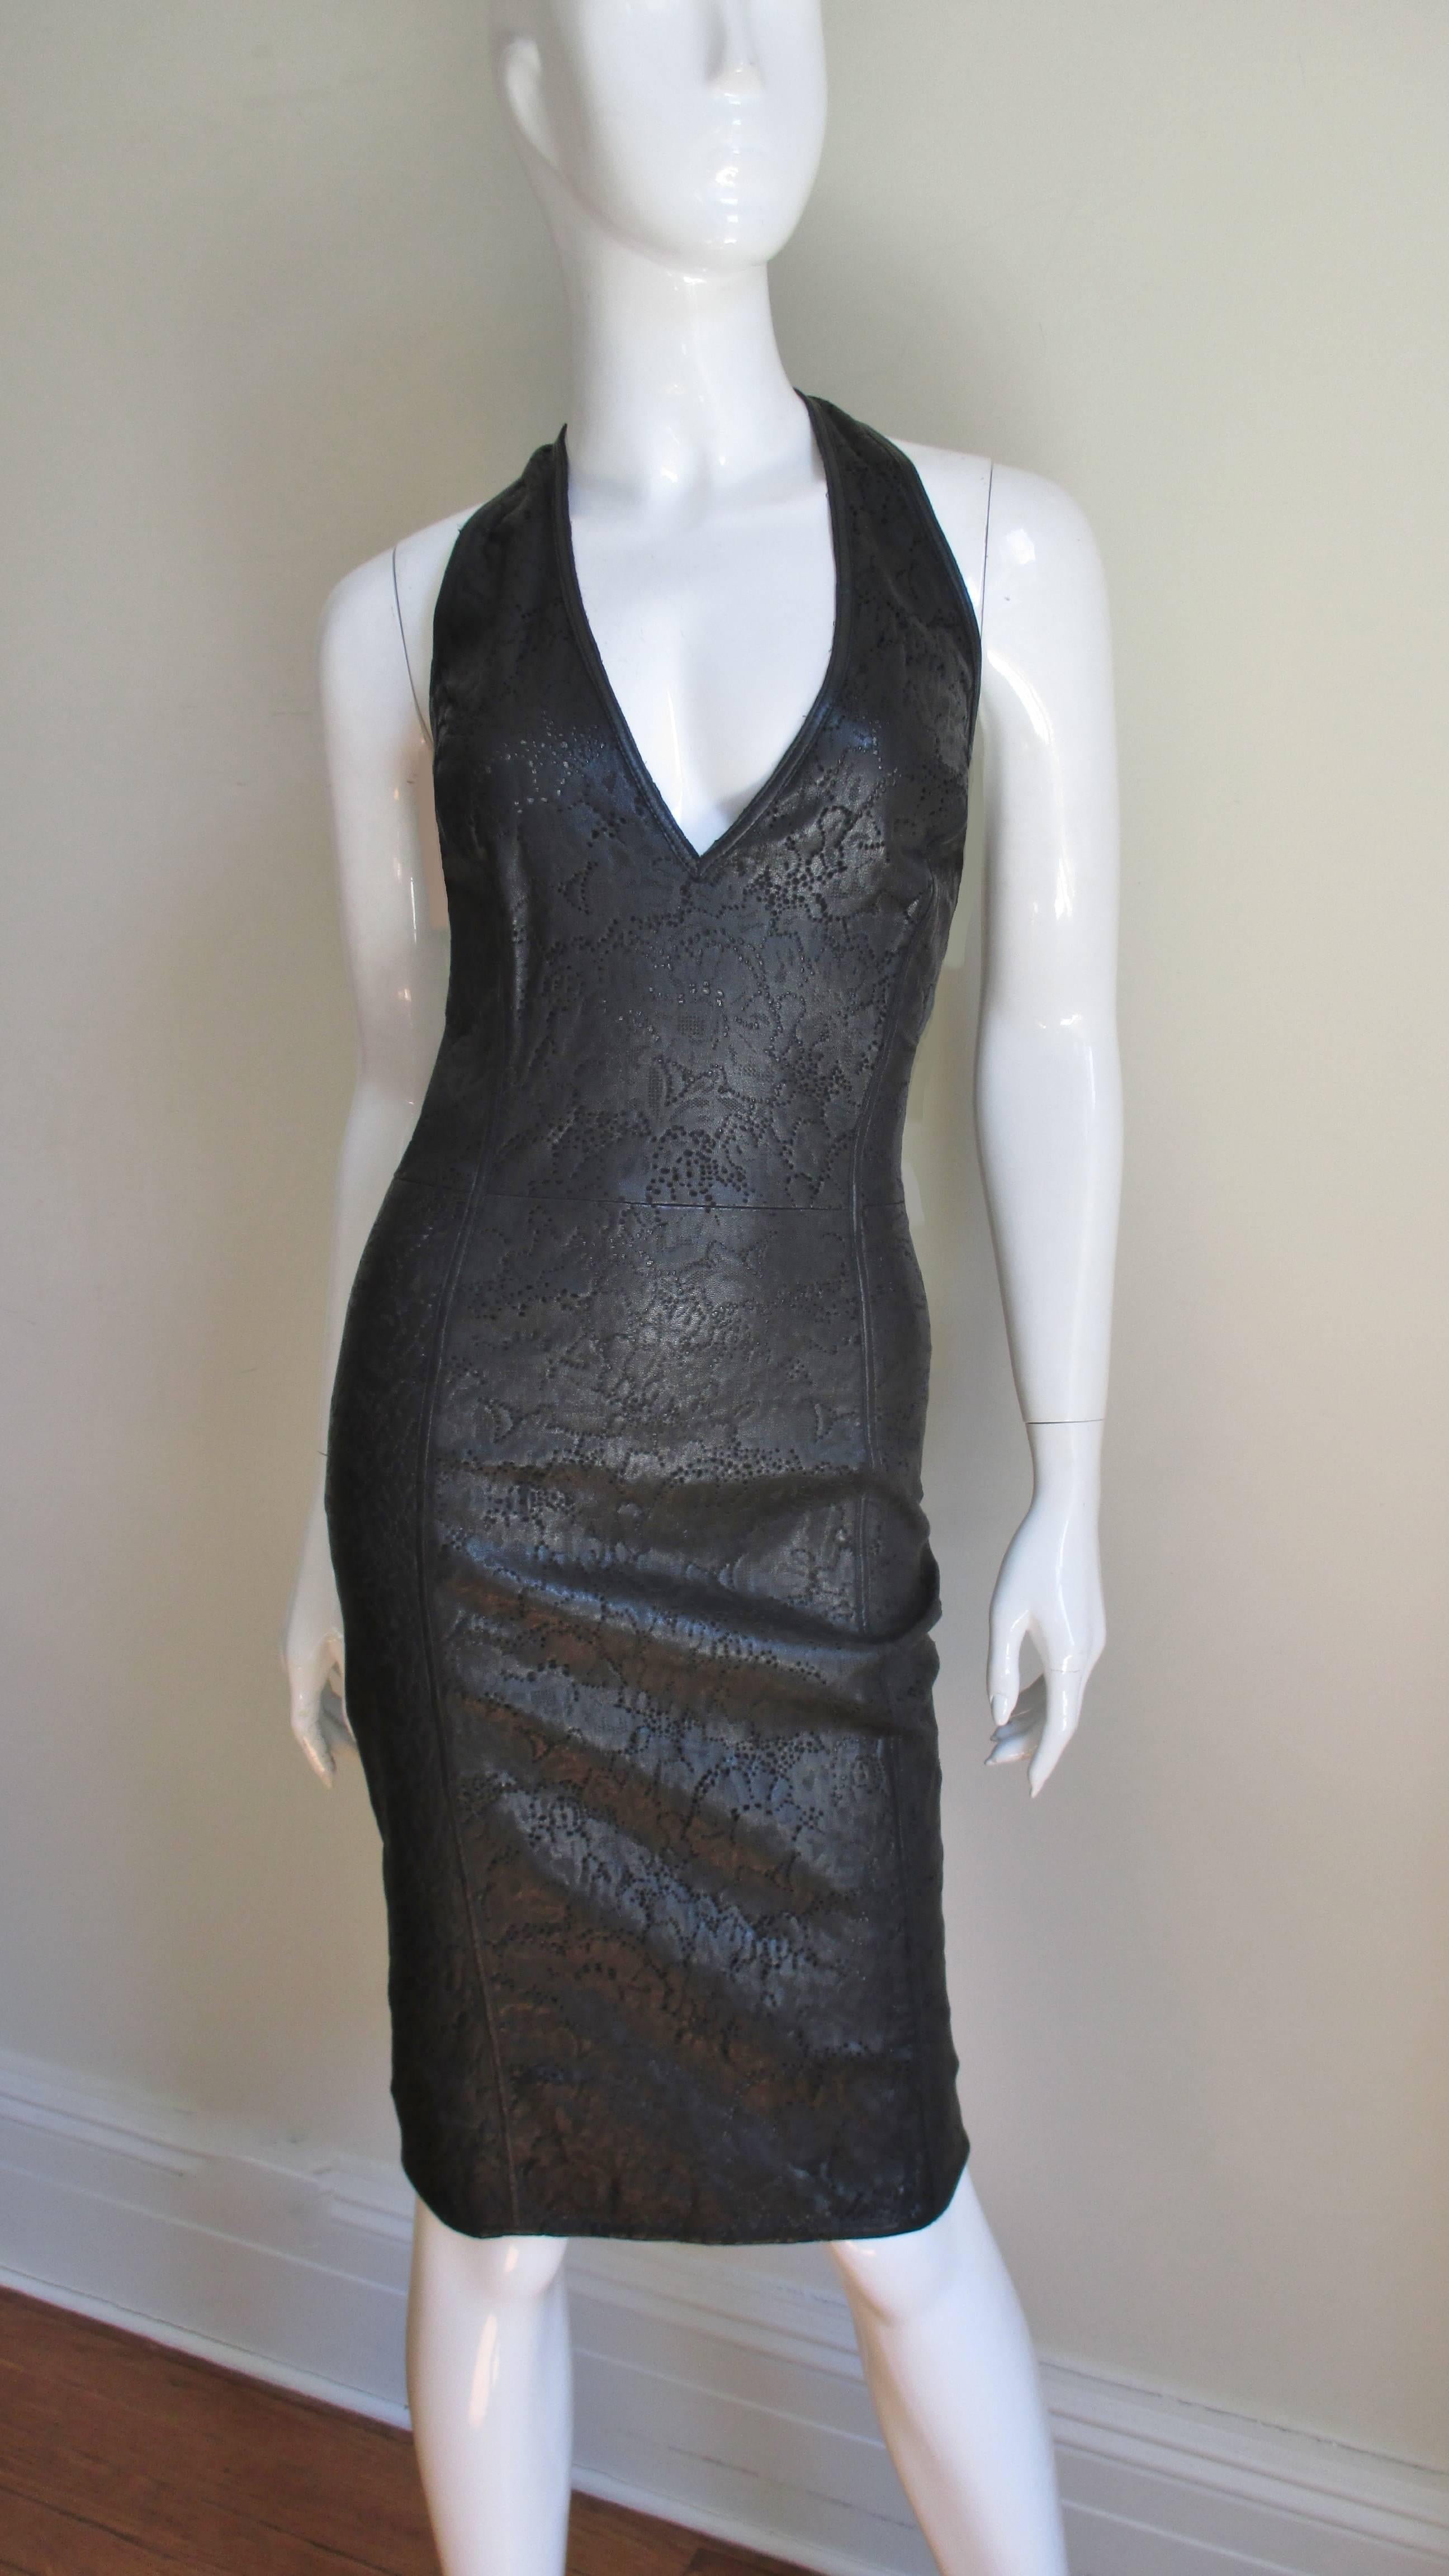 Black Gianni Versace Laser Perforated Leather Halter Dress 1990s For Sale